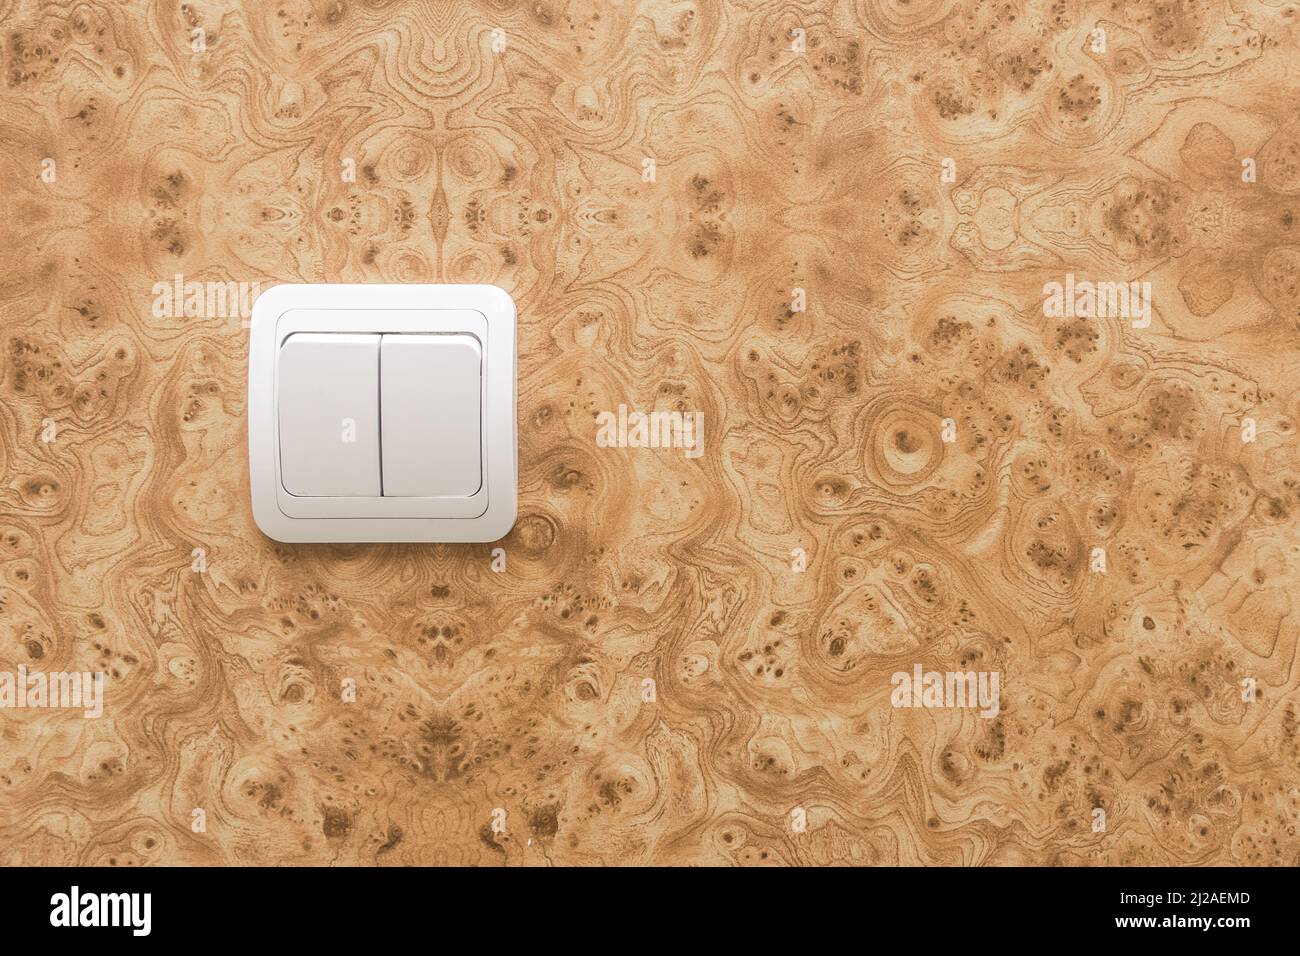 White Switch Power Light Home Appliance Electric Object on Wall. Stock Photo